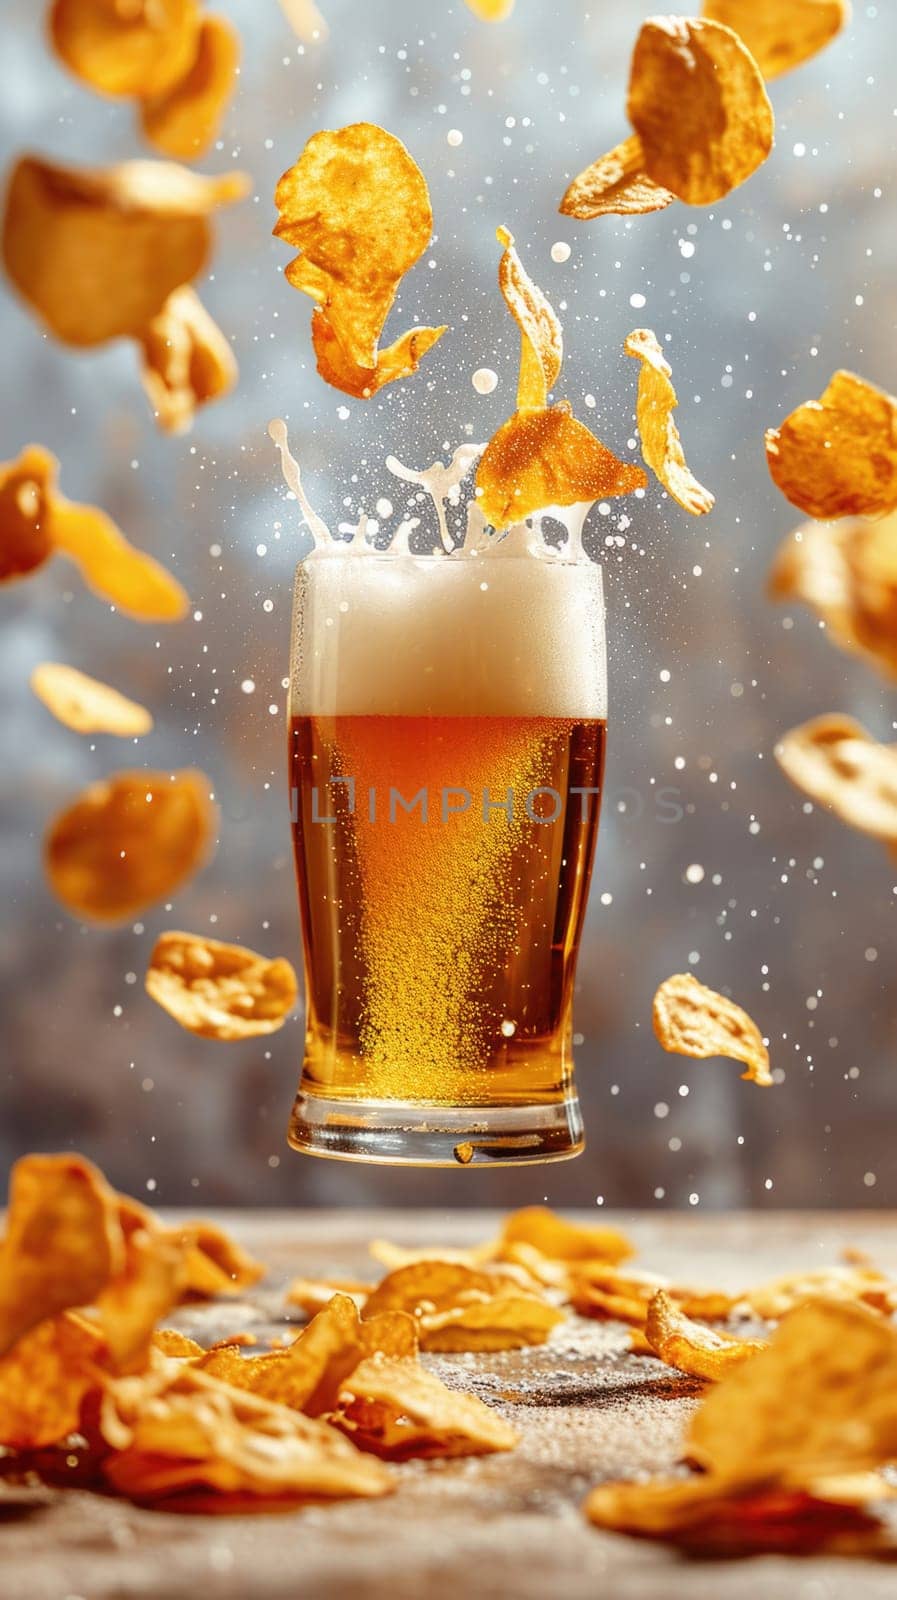 Chips levitating over a glass of beer in the air by Yurich32